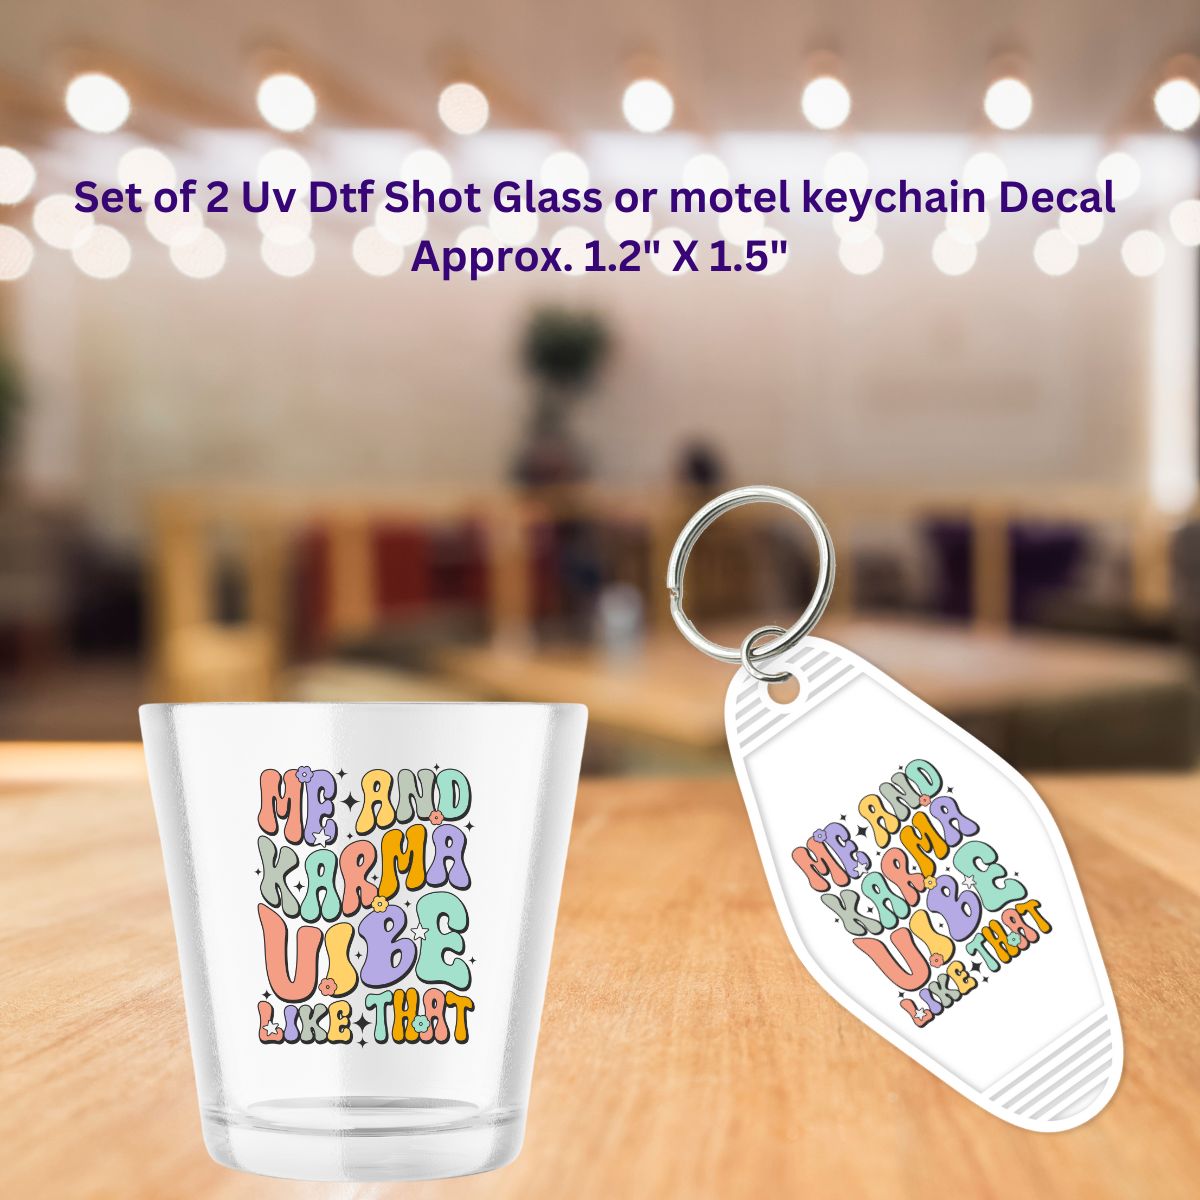 Set of 2 Uv Dtf Shot Glass or Motel Key Chain Decals Me And Karma Vibe Like That